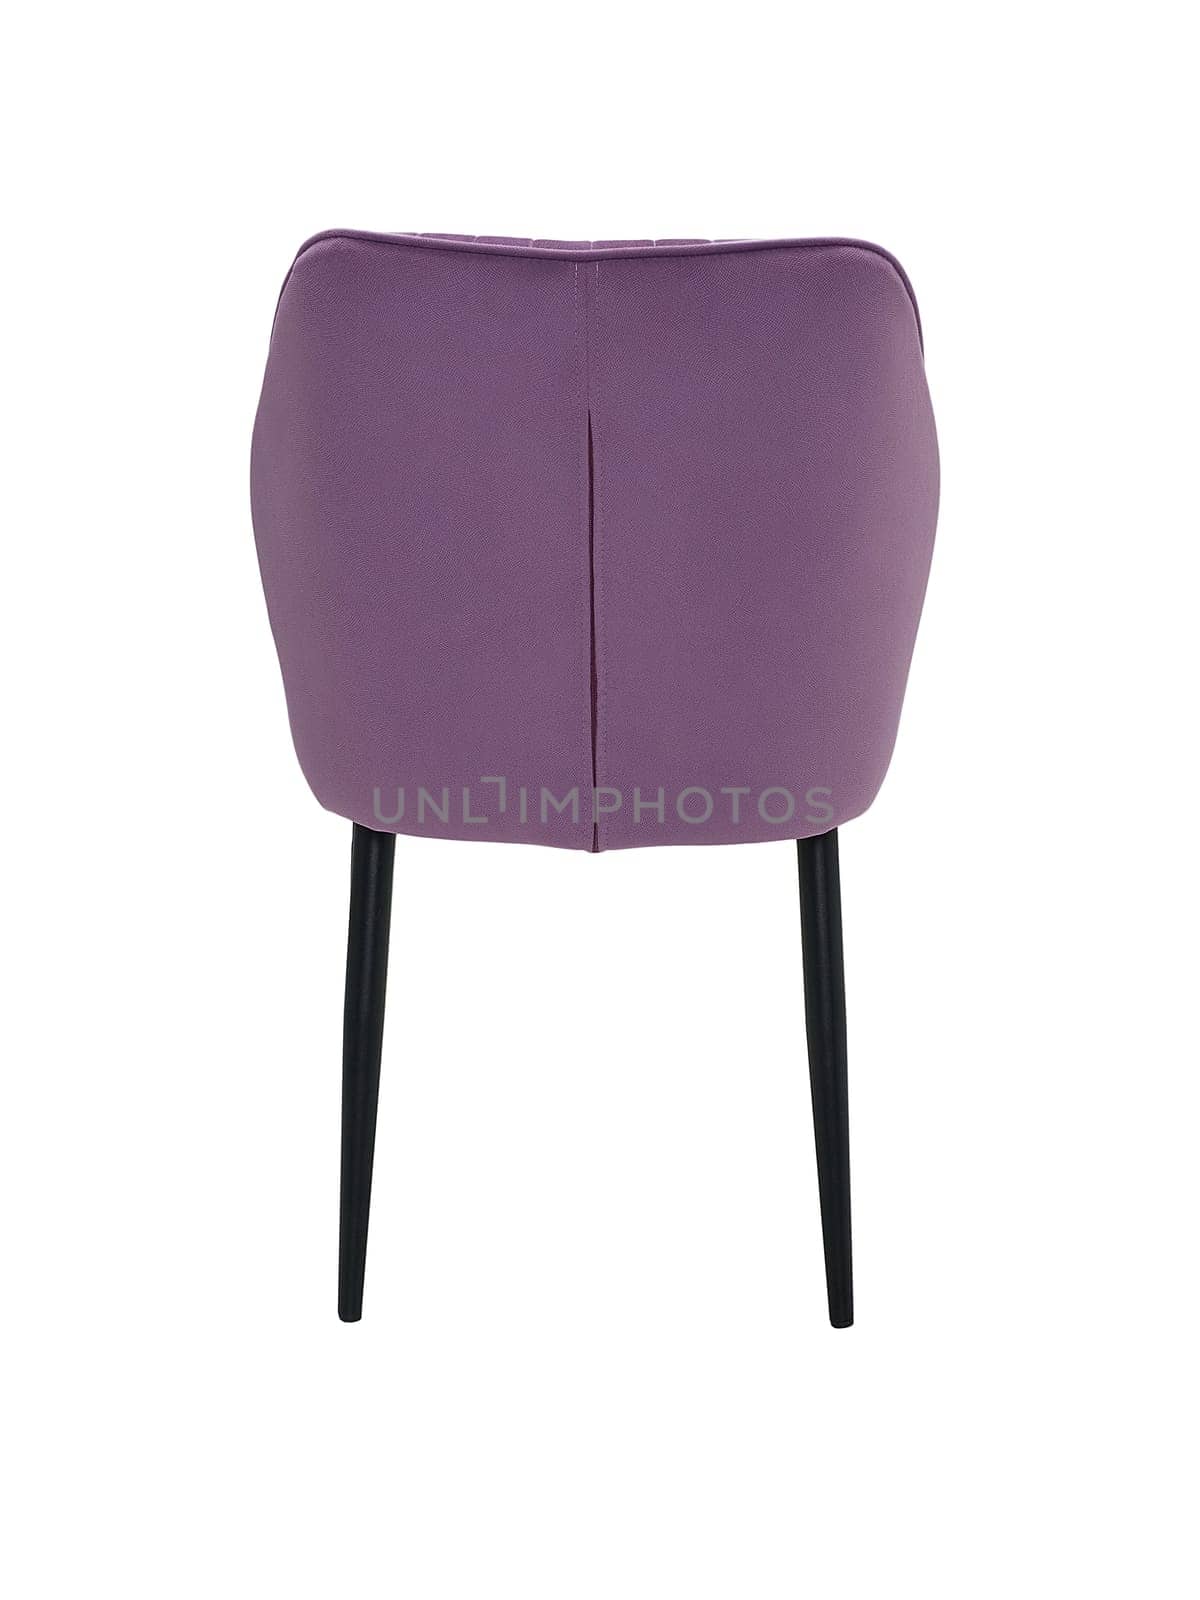 modern purple fabric chair with wooden legs isolated on white background, back view. contemporary furniture in classical style, interior, home design